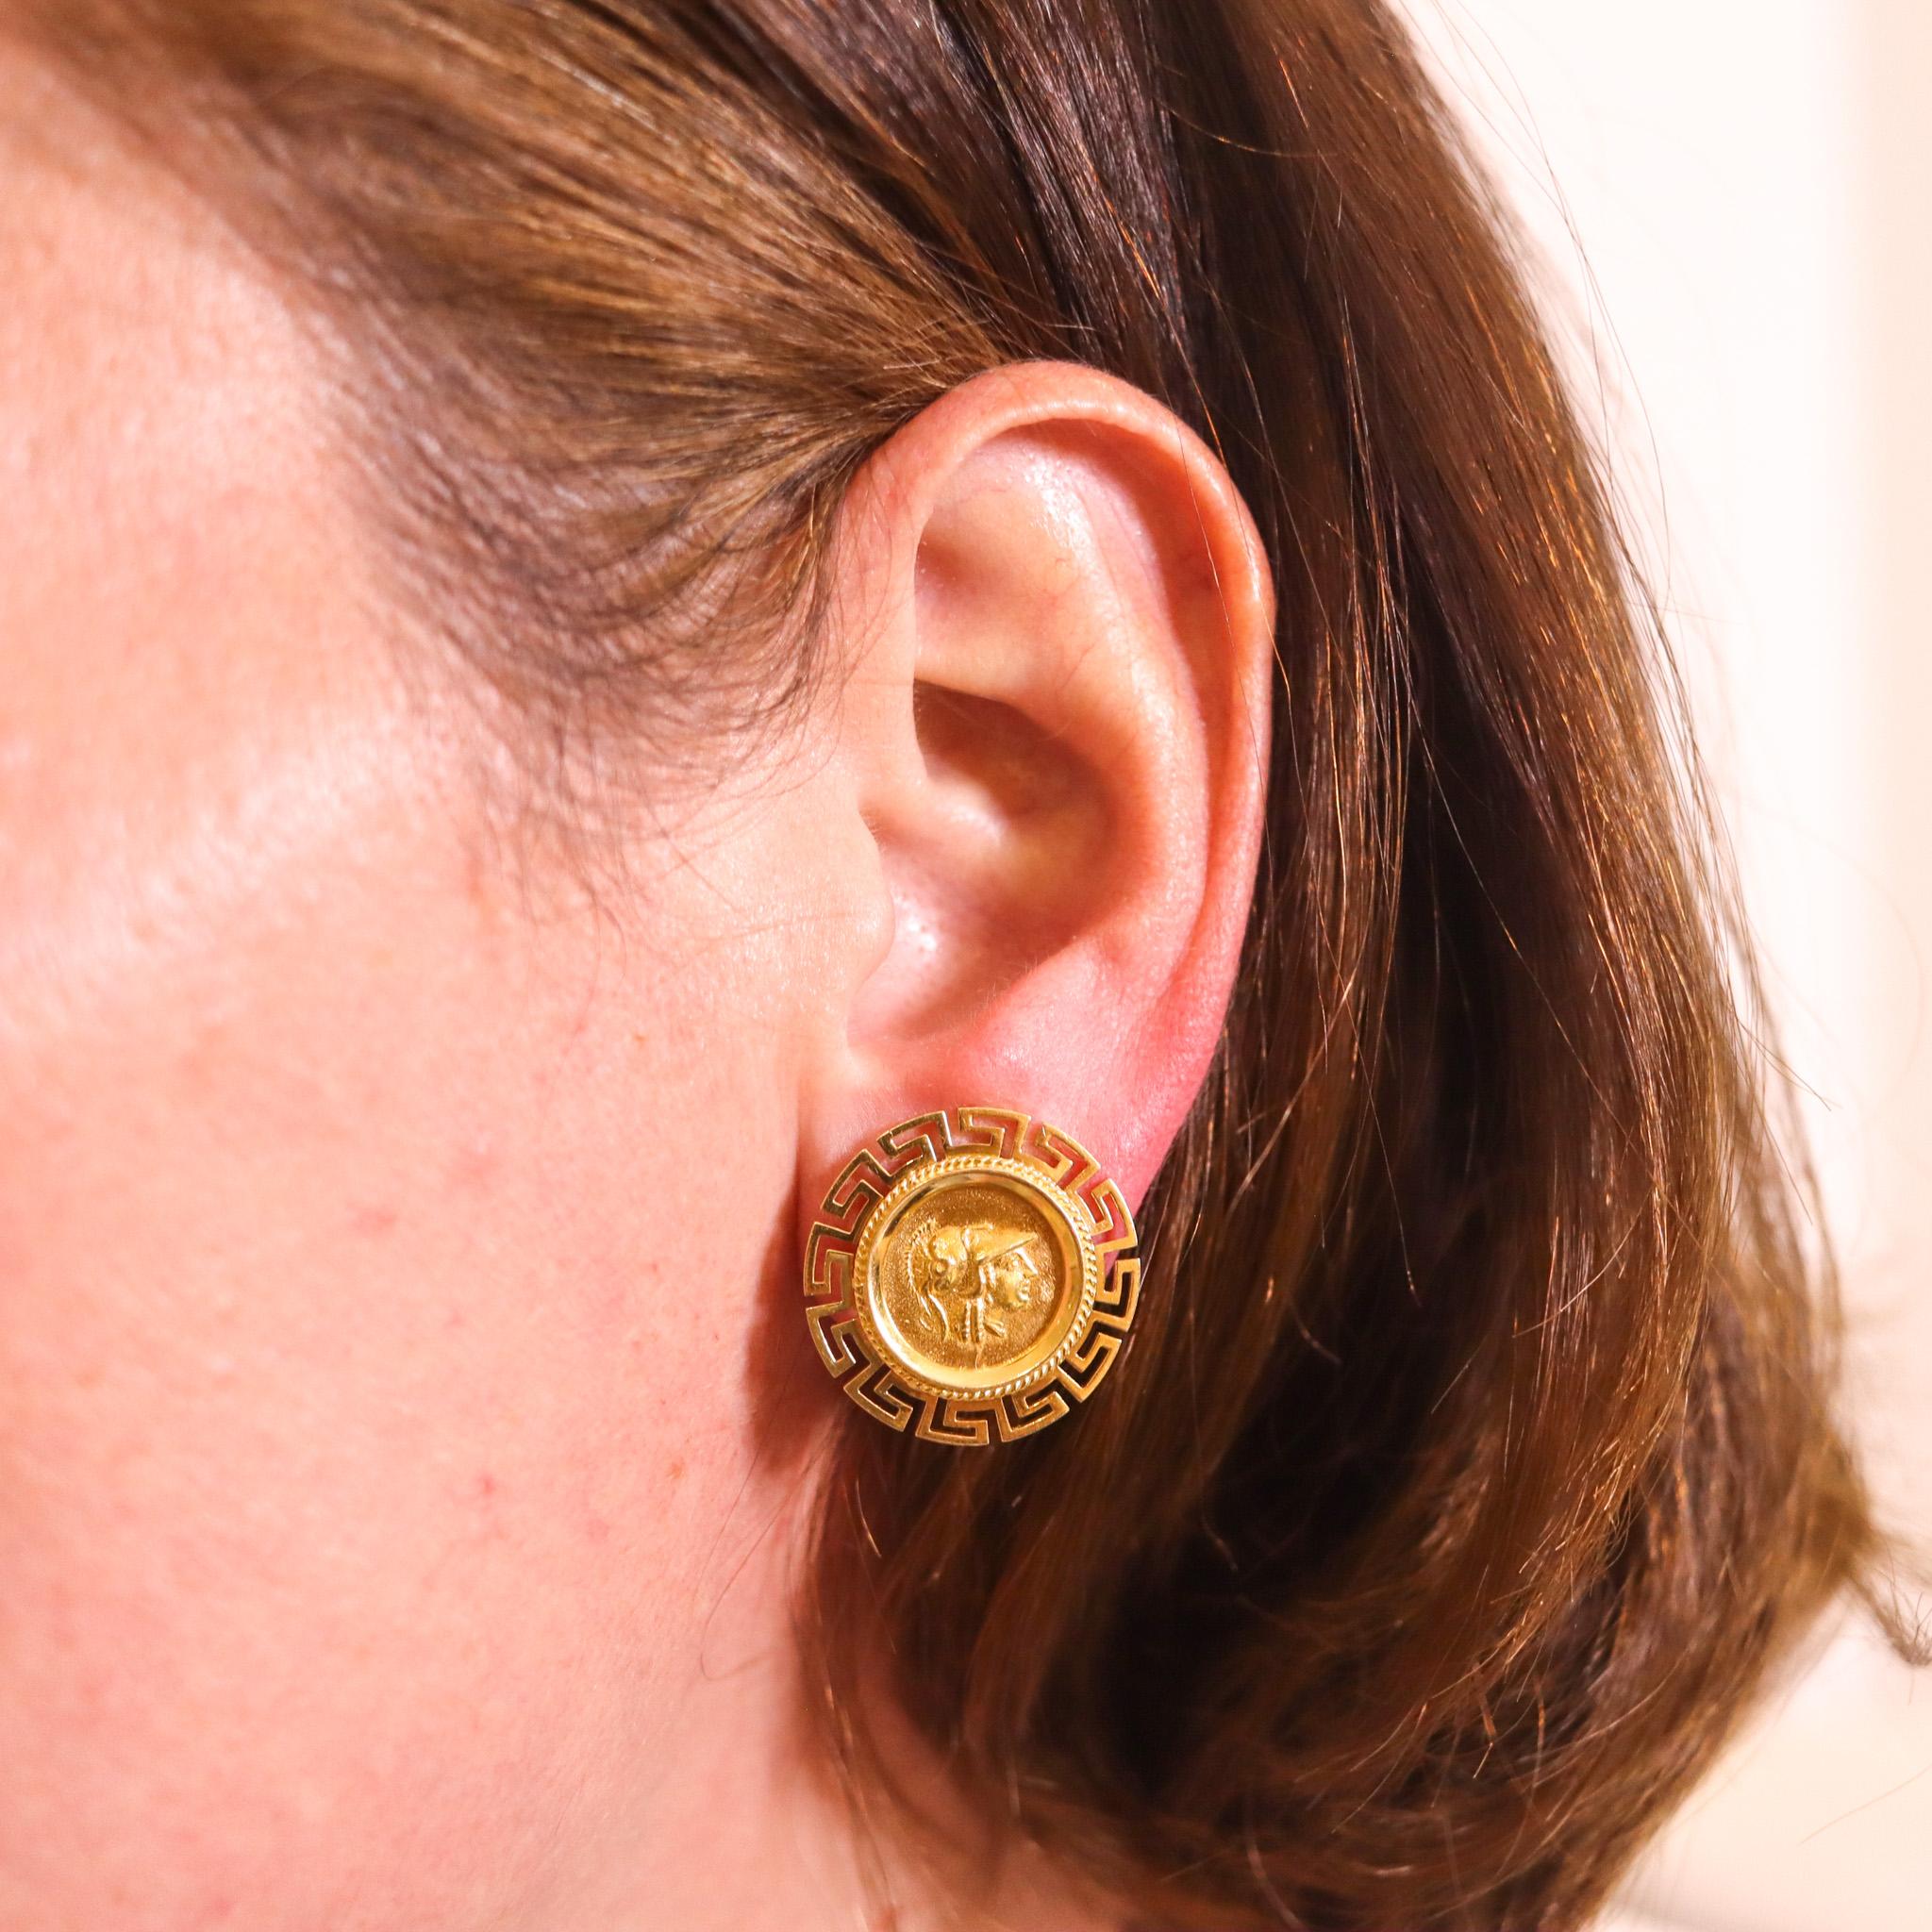 Greek revival earrings with gold coins.

Very beautiful pair of classic earrings, crafted with Greek revival patterns in solid yellow gold of 18 karats with high polished finish. They are embellished with two gold coins depicting the portrait of